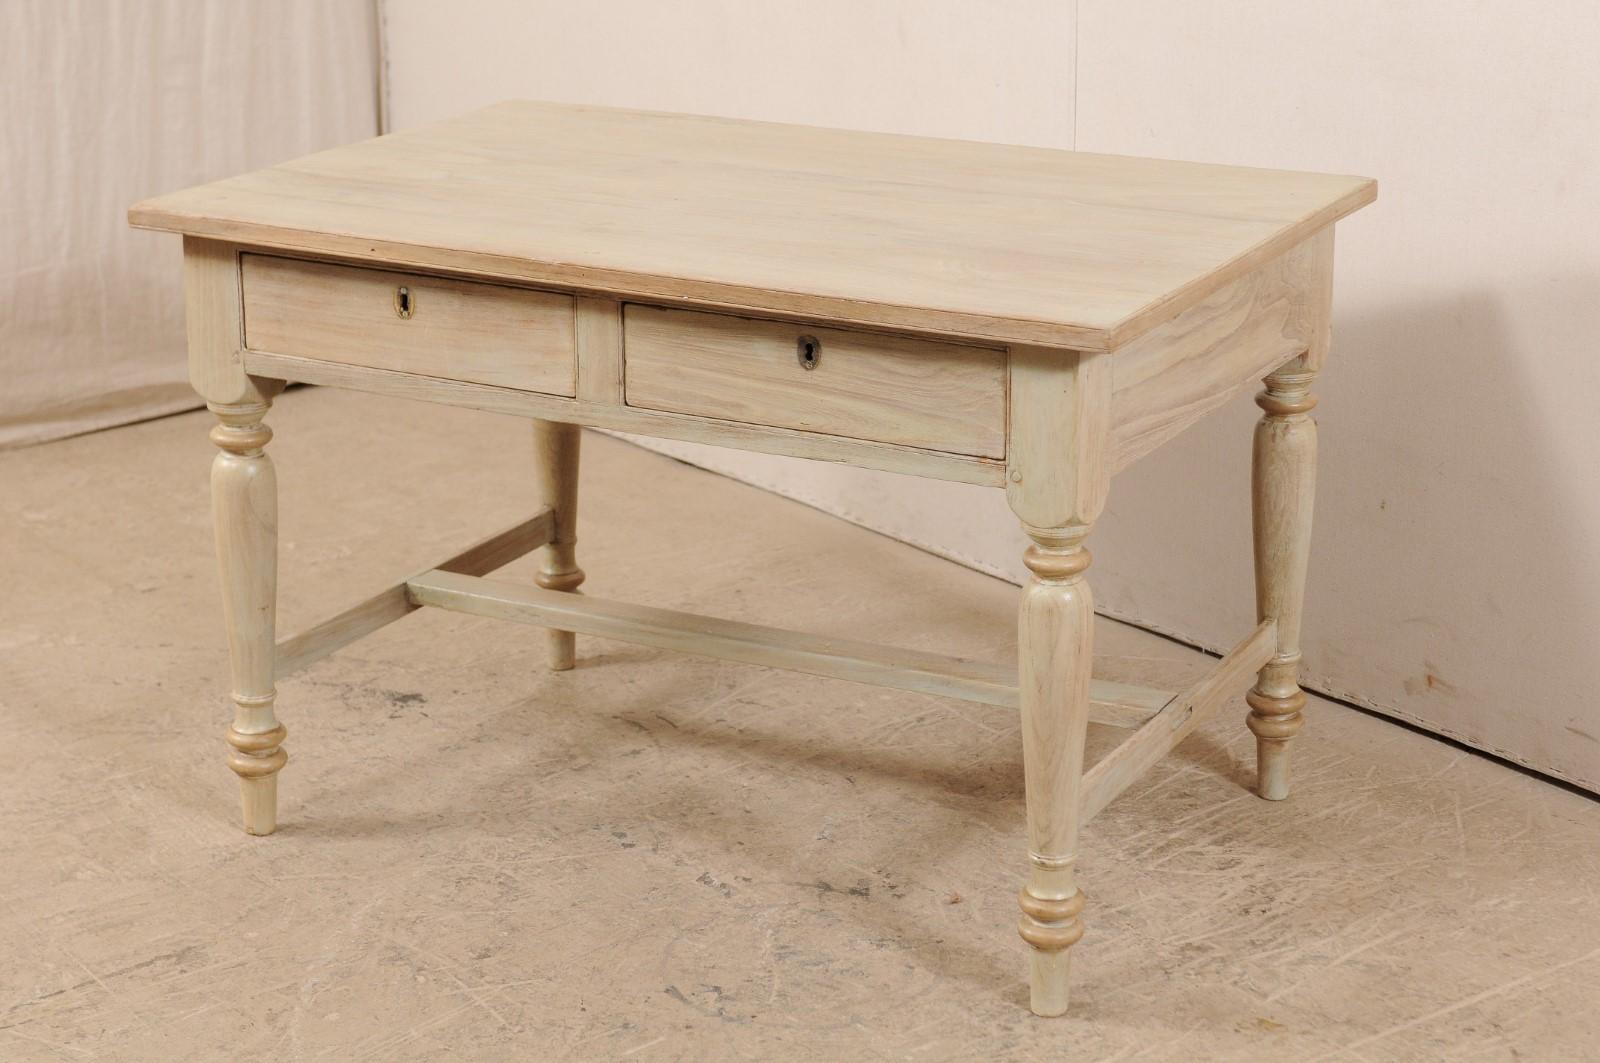 wooden table with drawers